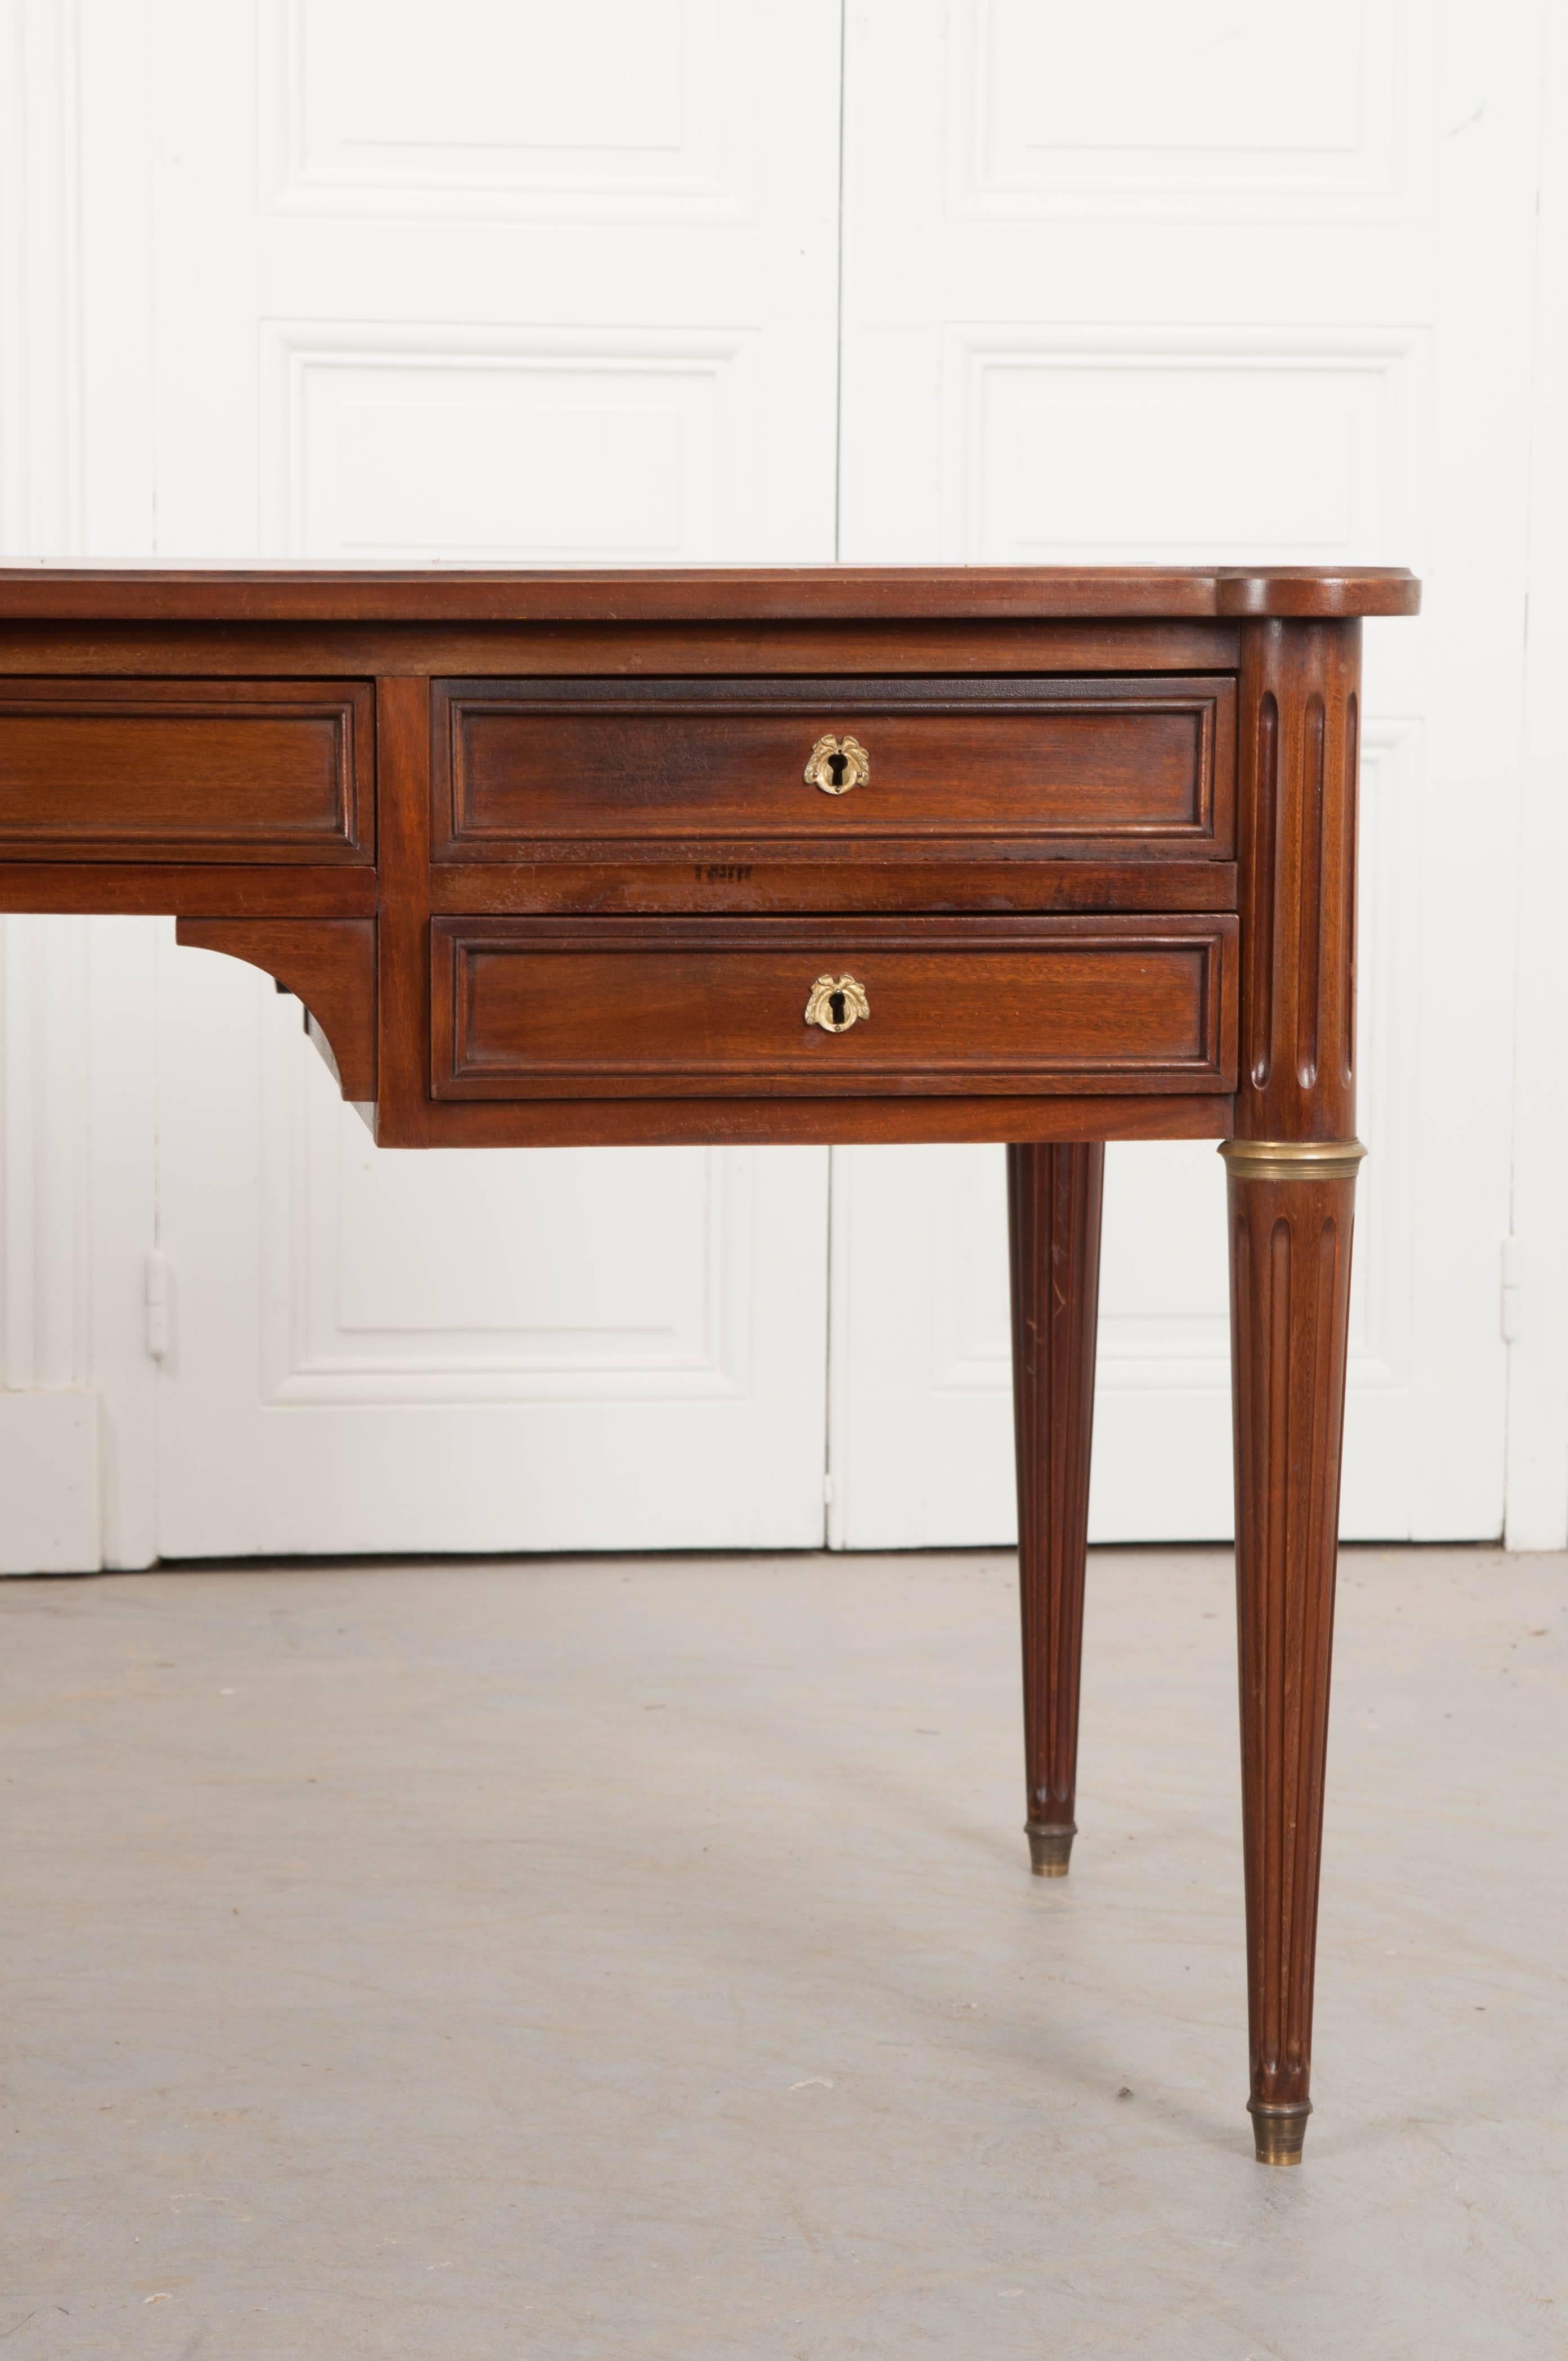 A remarkable mahogany Louis XVI style desk from France. The desk’s top has been clad in an outstanding cognac colored leather that has been embellished with gold tooling that can also be found on the slides that extend from each end of the desk. The